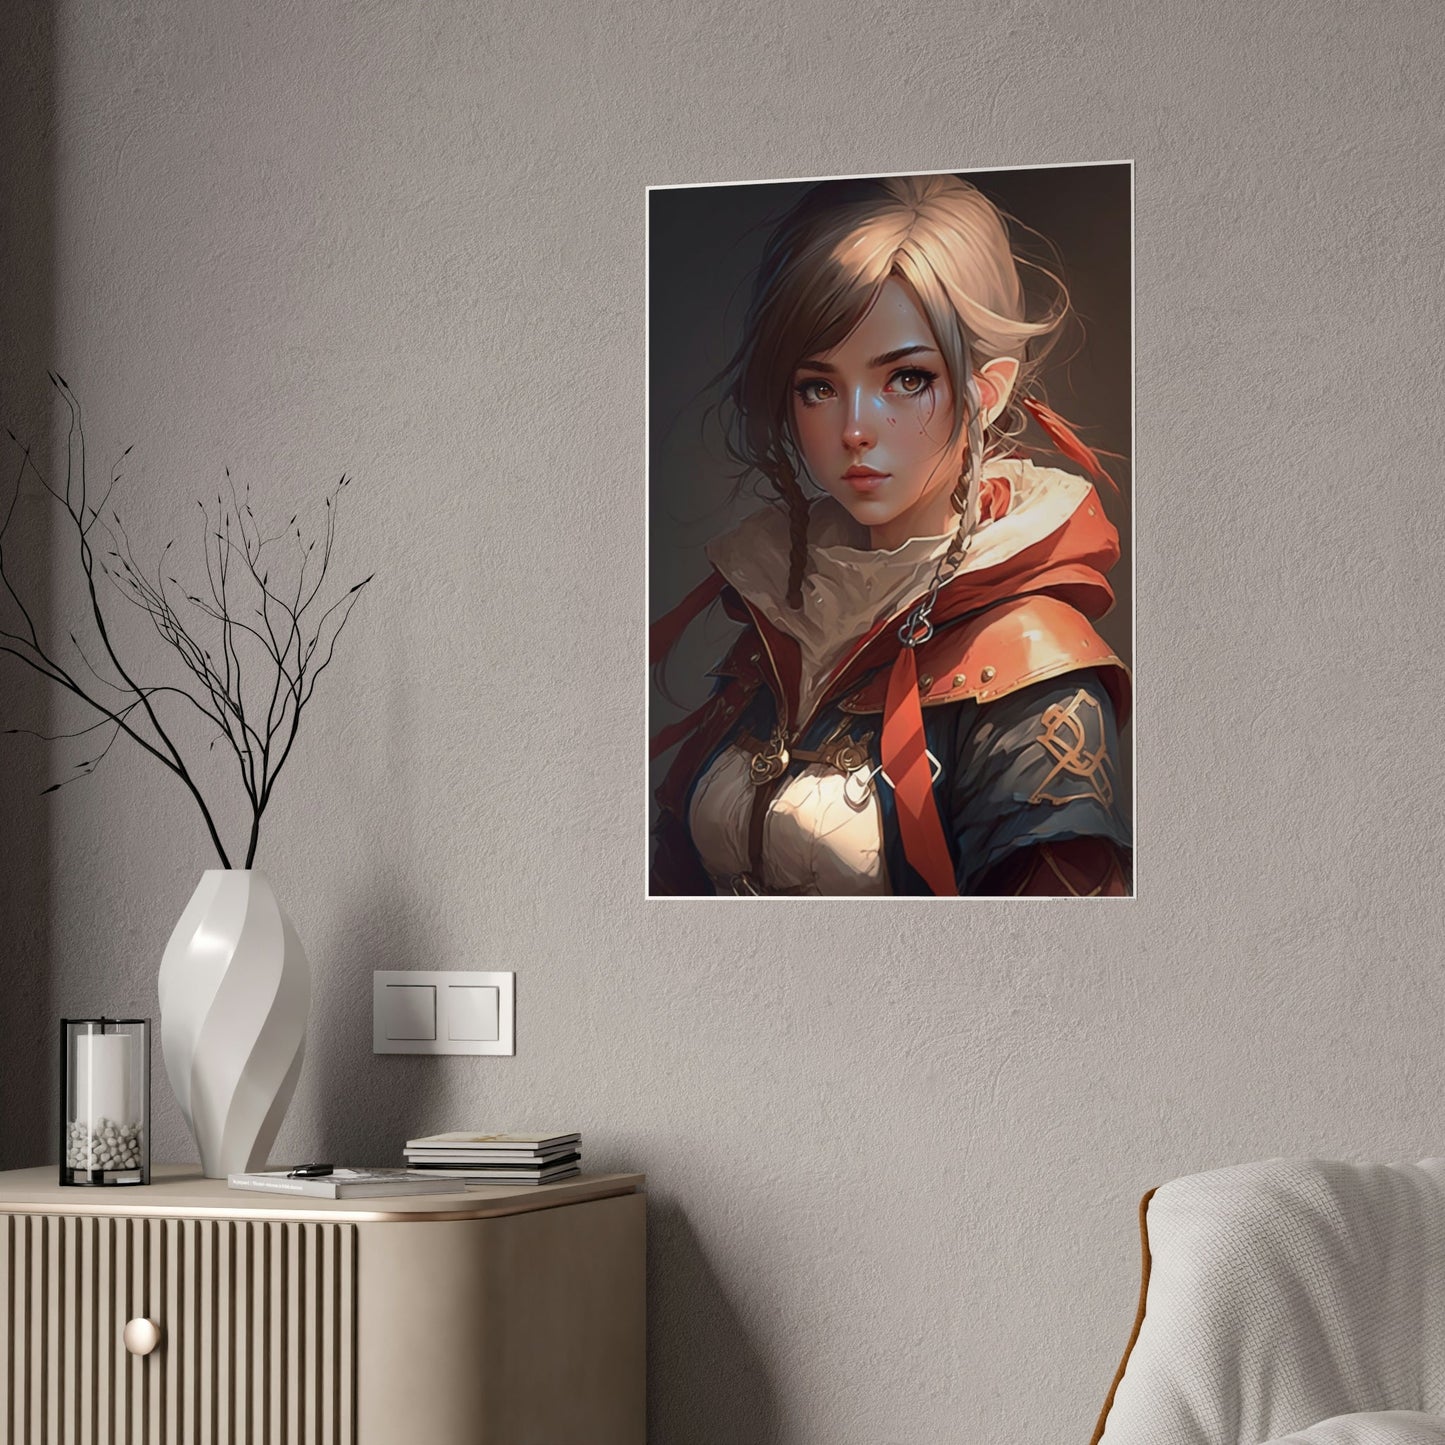 Anime Dreams: Canvas Art with Fantasy Characters in a Dreamlike World